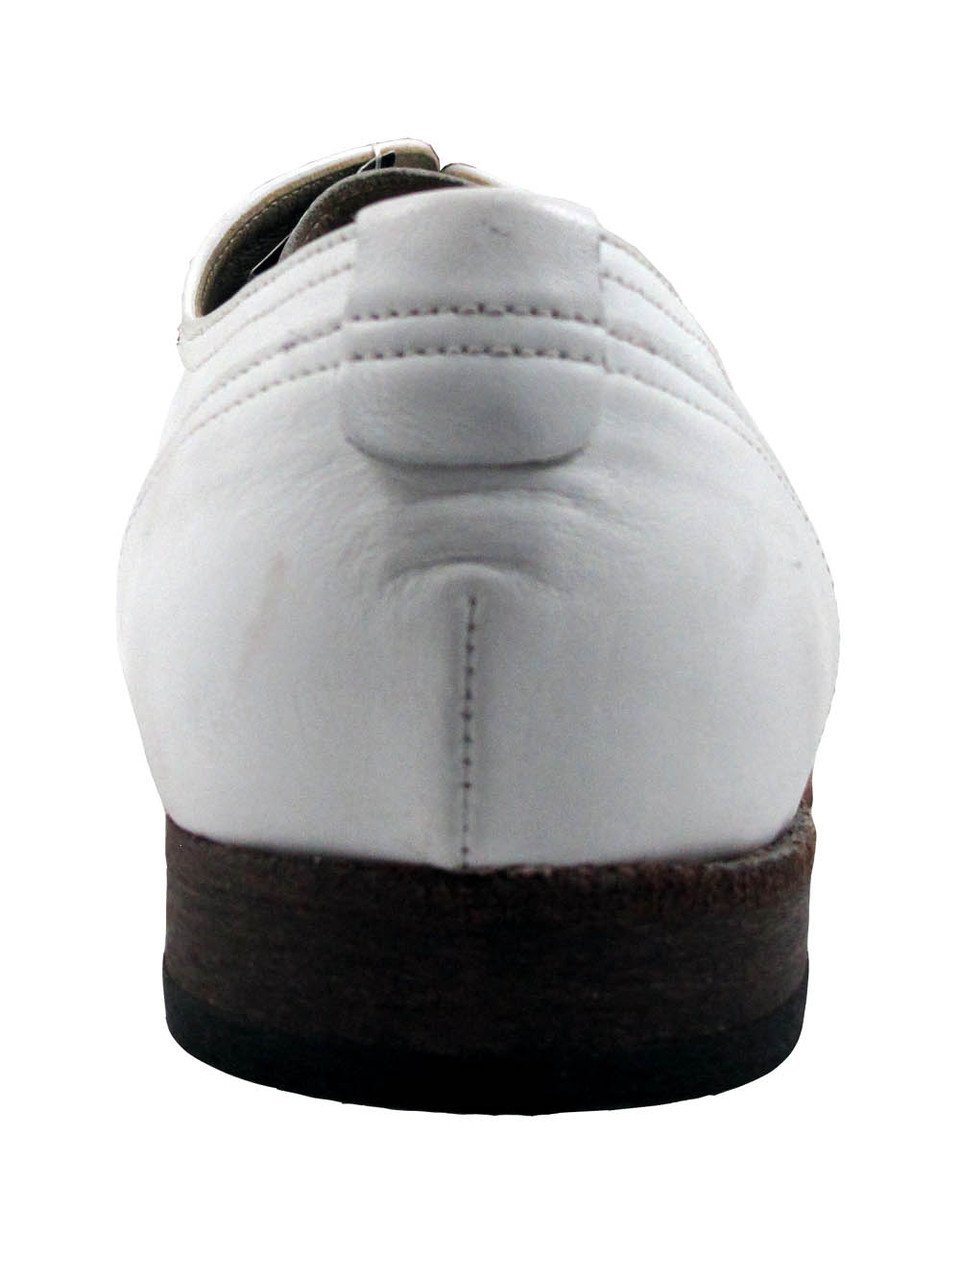 Size 6 To 13 Classic Italy Mens Oxford Real Leather Shoes White